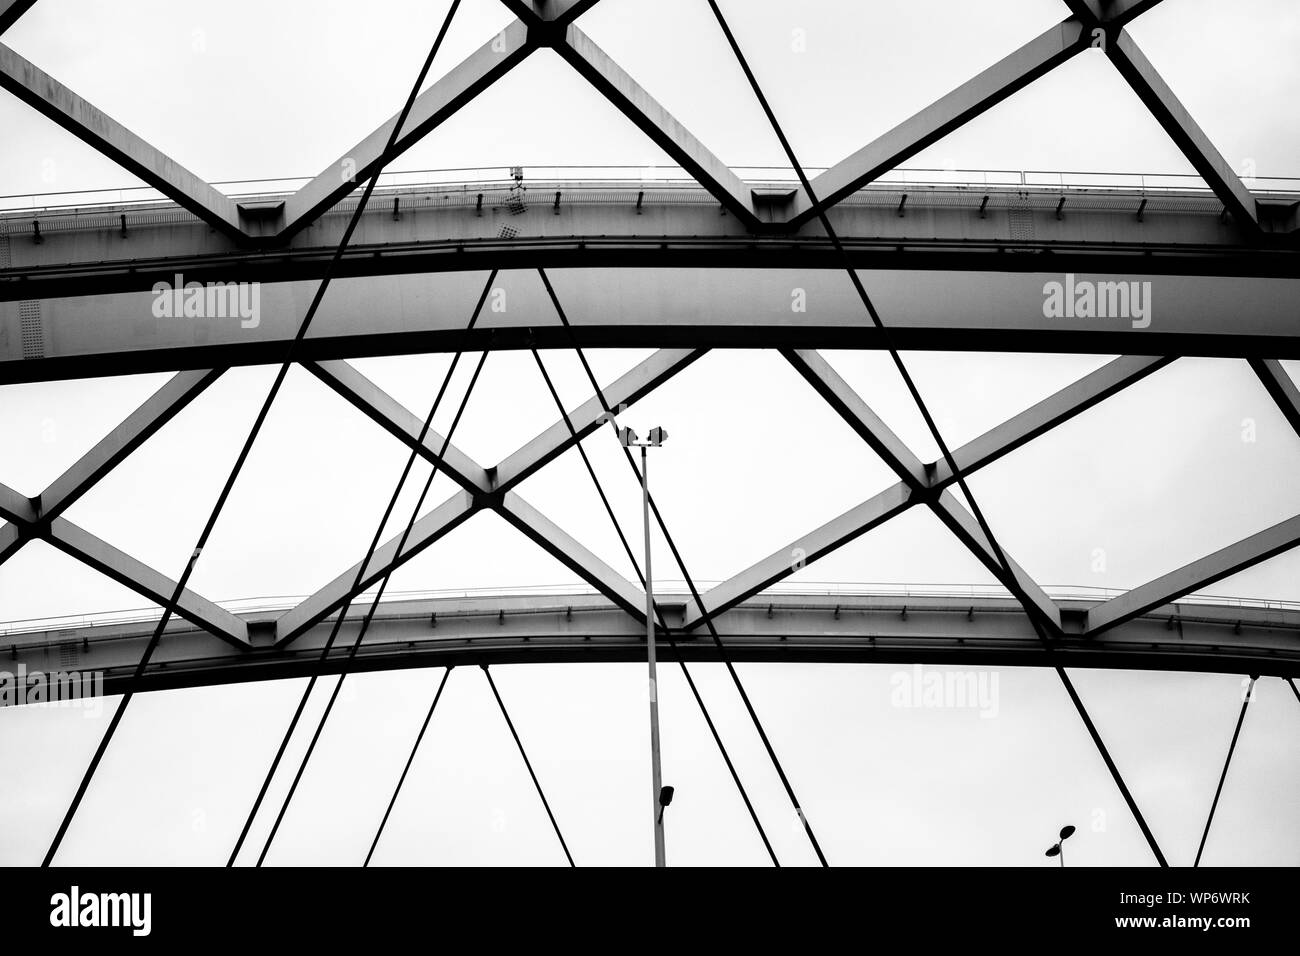 Structure of steel beams and cables in black and white Stock Photo